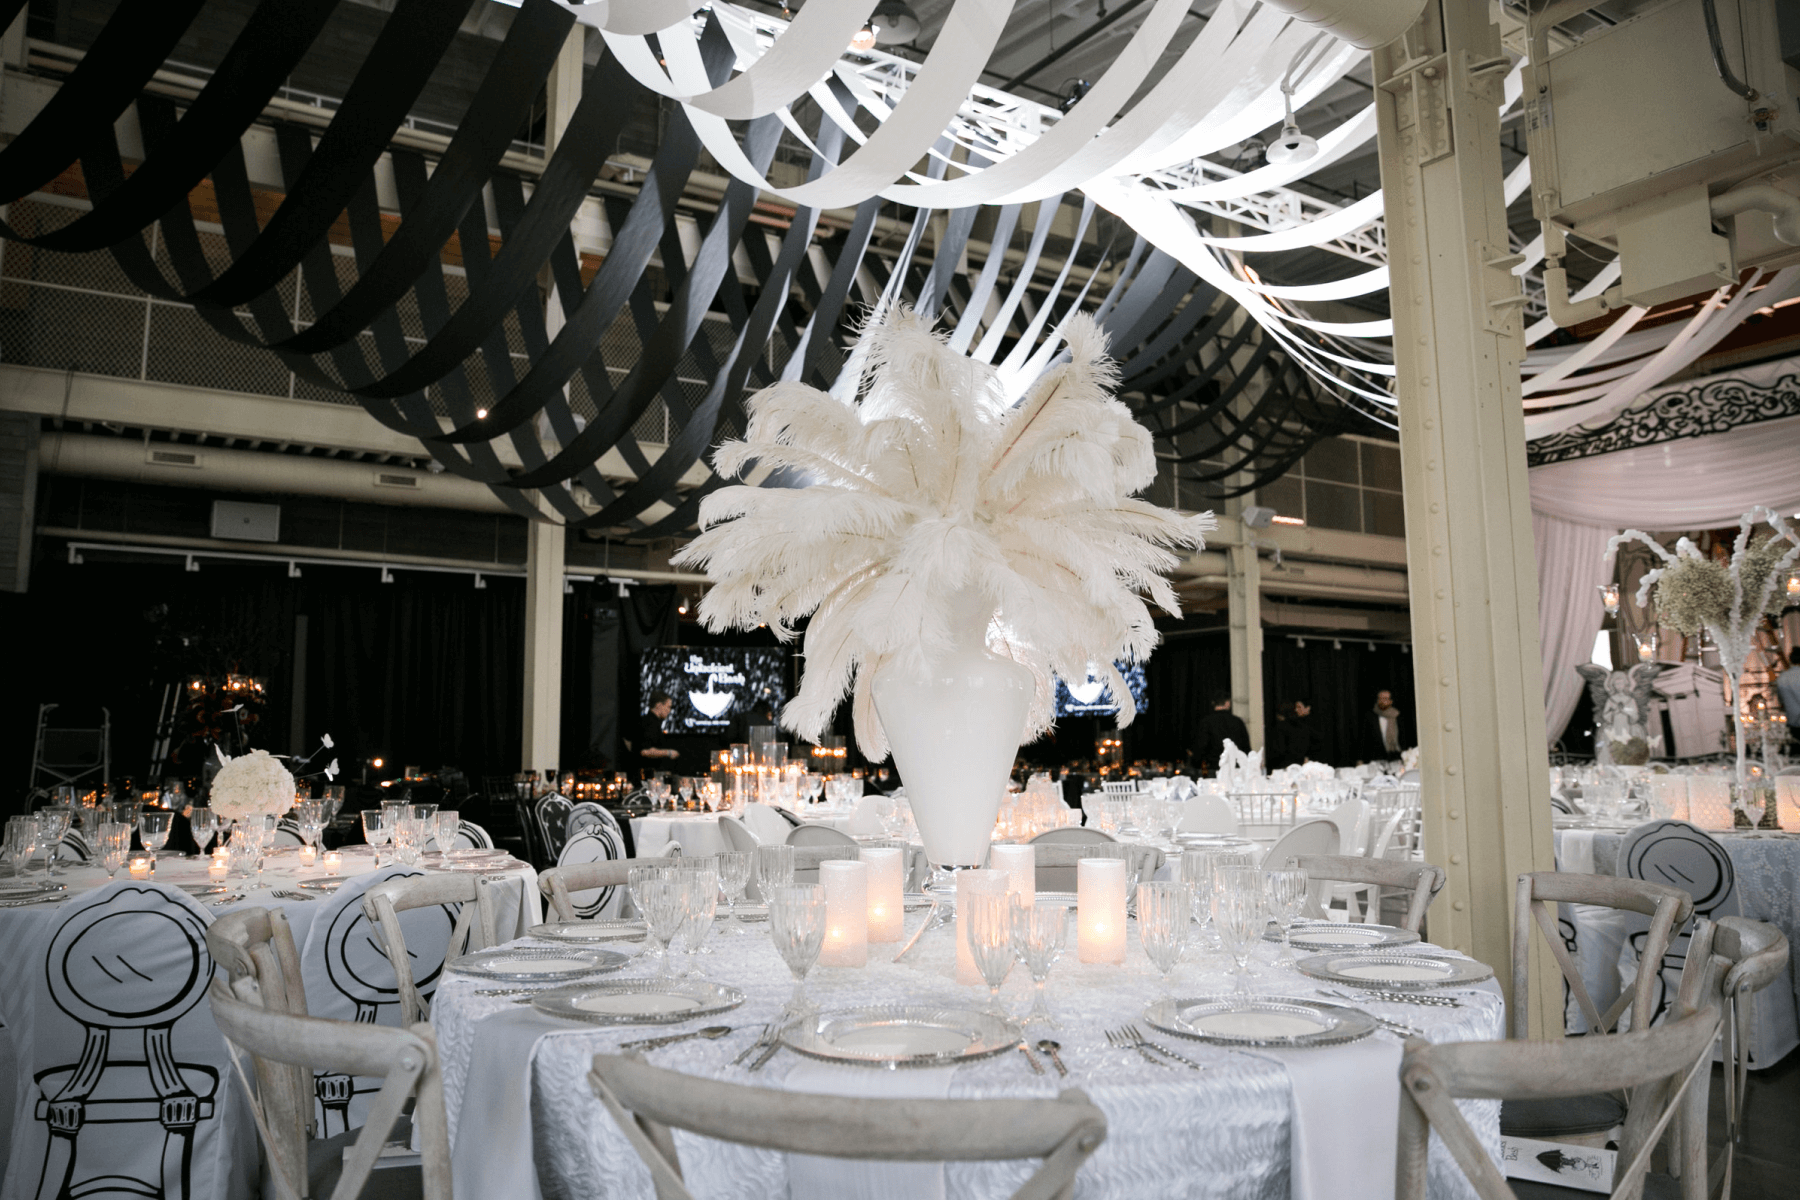 A large event space with round white tables and chairs, white ostrich feathers as centerpieces, and white and black fabric strips draped from the ceiling.